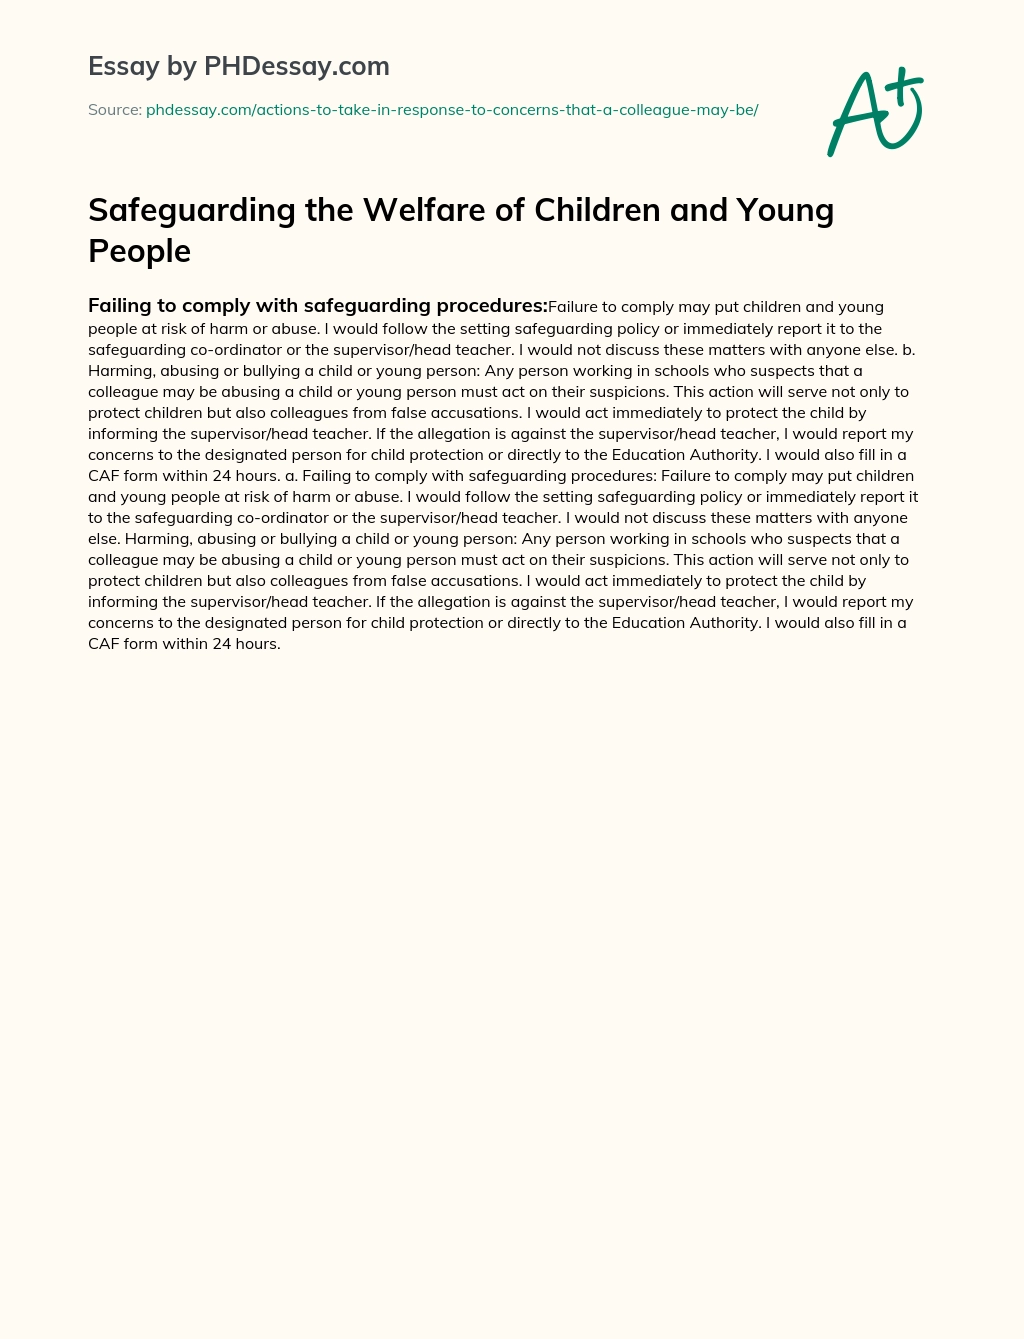 Safeguarding the Welfare of Children and Young People essay